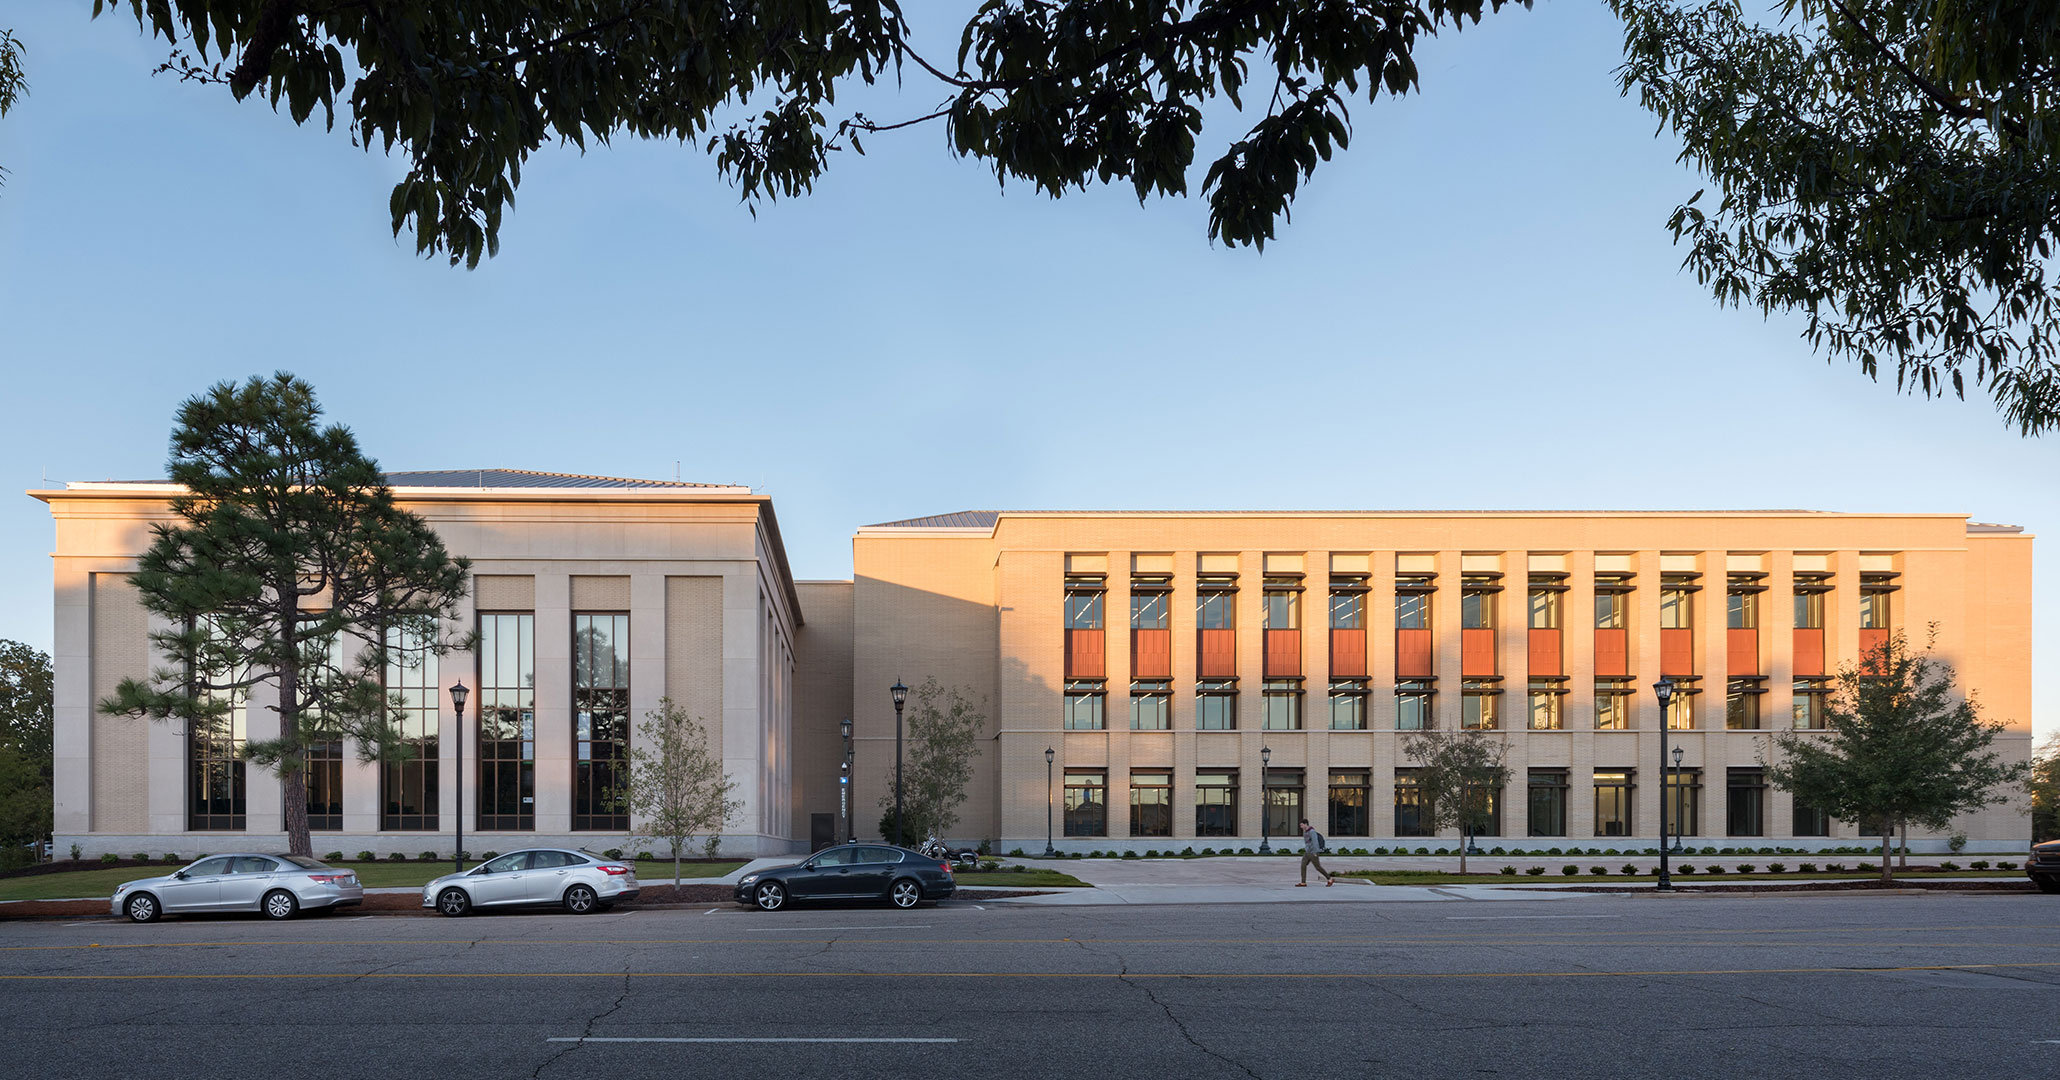 UofSC worked with Boudreaux architects to design the new prestigious Law School.